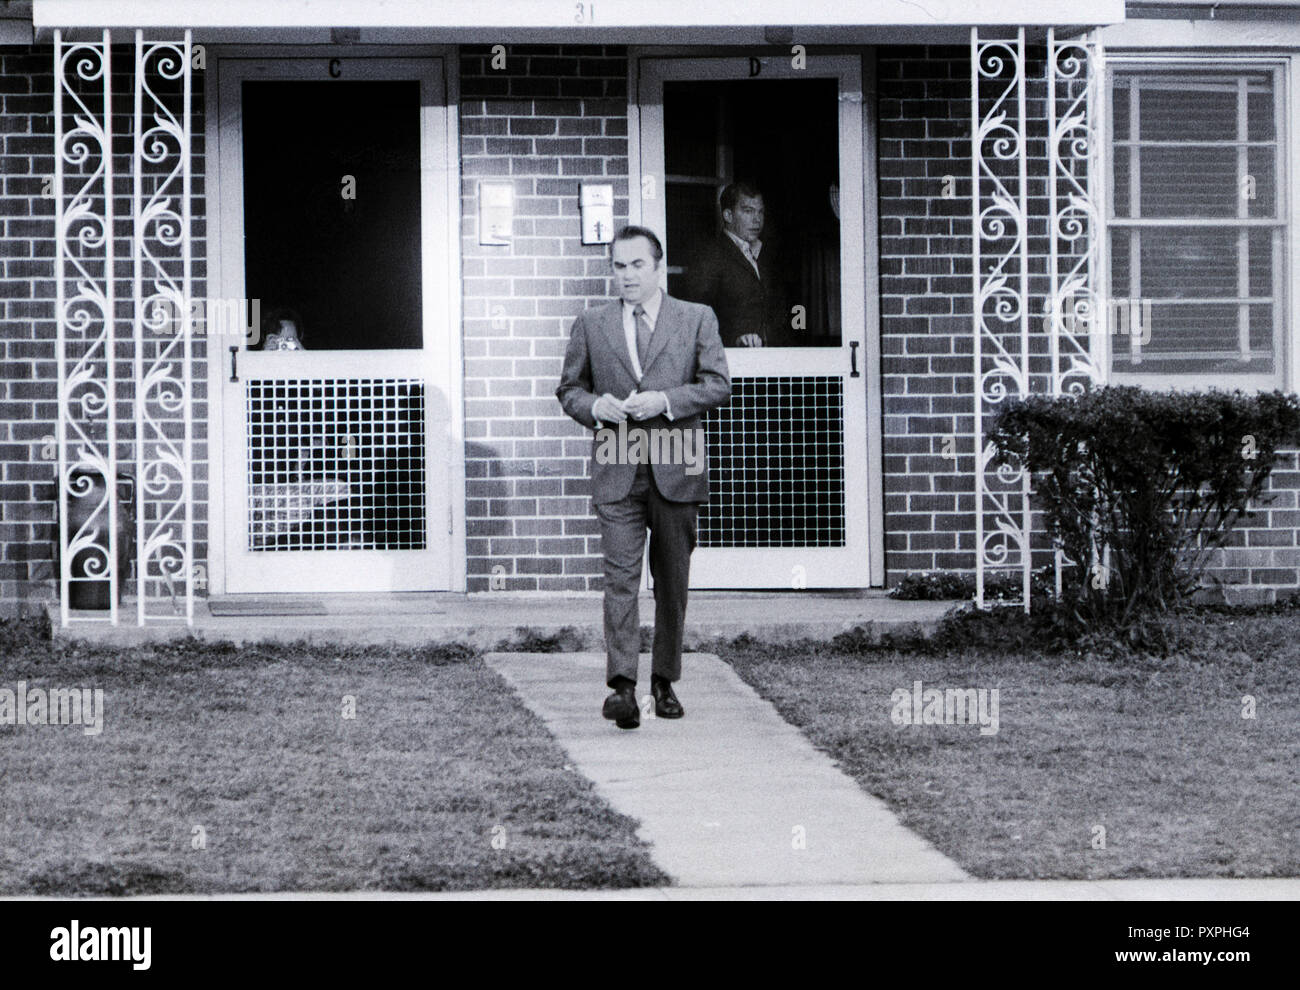 Lt. William Calley peers from his door as Alabama Governor George Wallace leaves after a visit to Calley who is currently under house arrest on post at Ft. Benning, Ga.. William Laws Calley Jr. is a former United States Army officer convicted by court-martial of murdering 22 unarmed South Vietnamese civilians in the My Lai Massacre on March 16, 1968, during the Vietnam War. Calley's next door neighbor snaps a photo of the governor's departure. Stock Photo